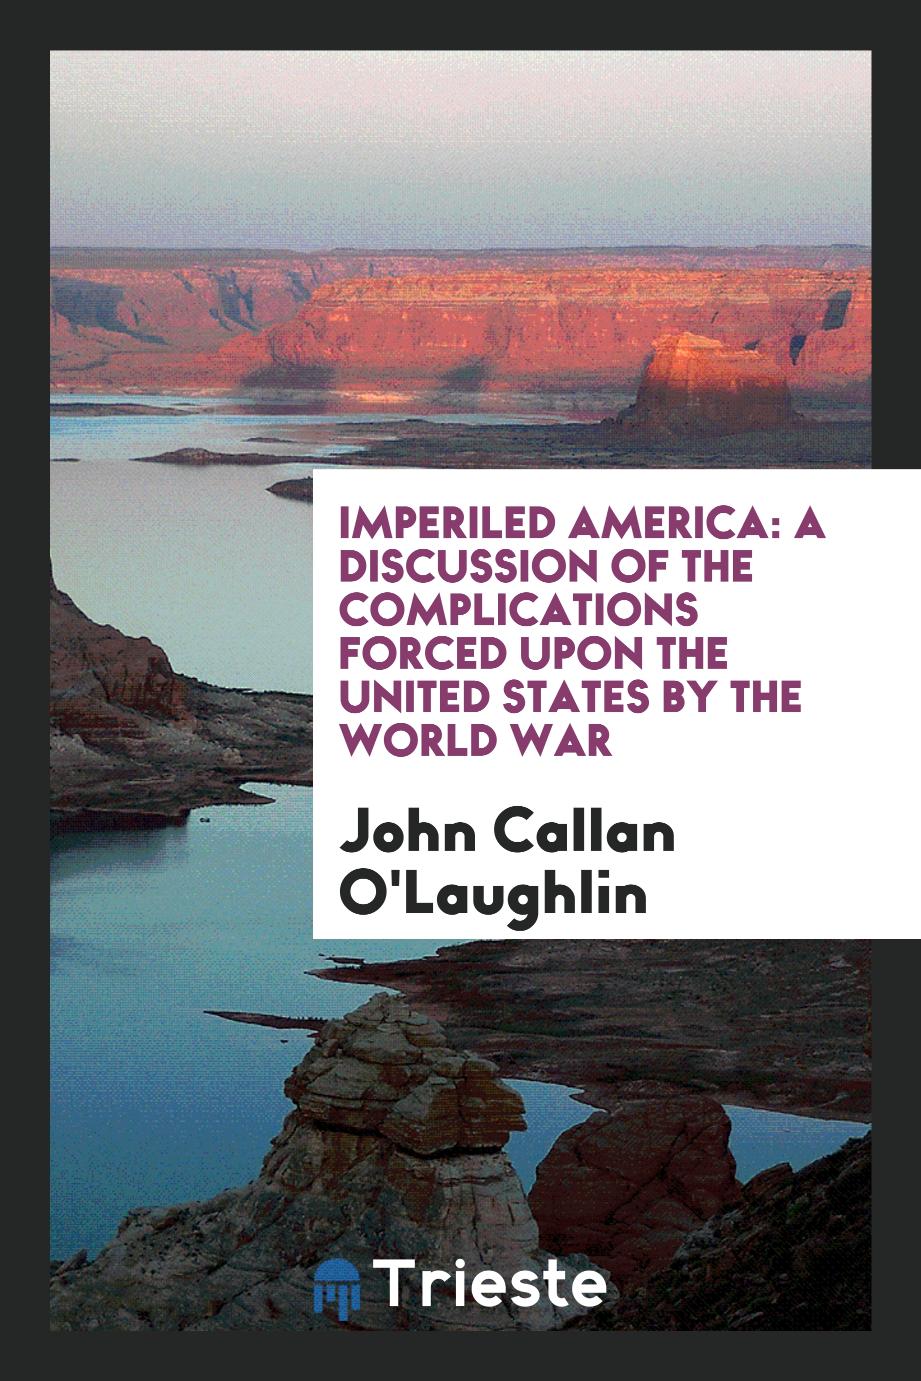 Imperiled America: A Discussion of the Complications Forced Upon the United States by the World War